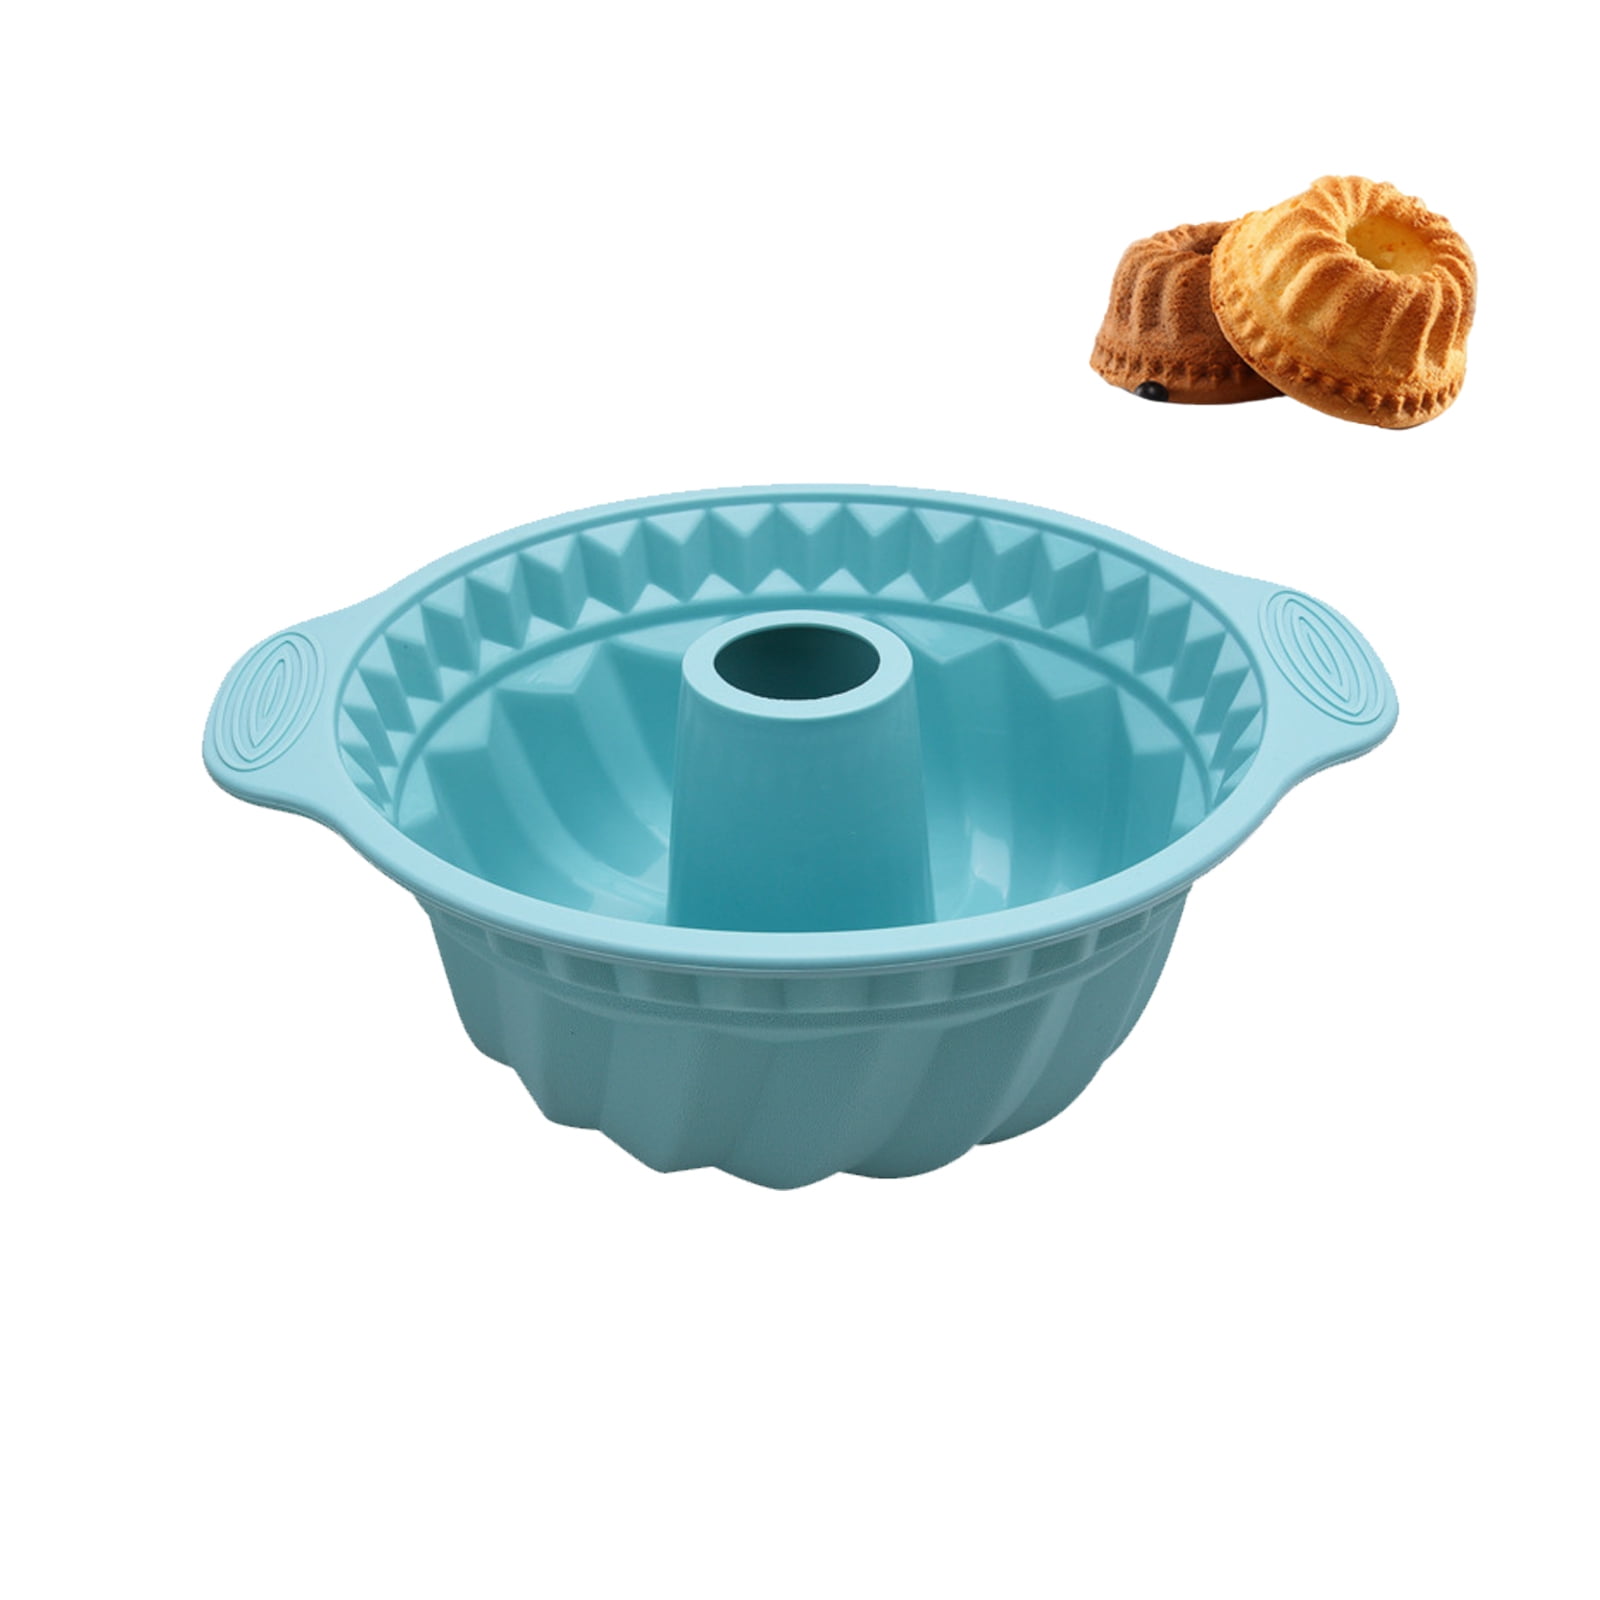 Silicone Bundt Cake Pan, Non-stick Bundt Pan with Sturdy Handle, Perfect  Bakeware for Cake, Jello